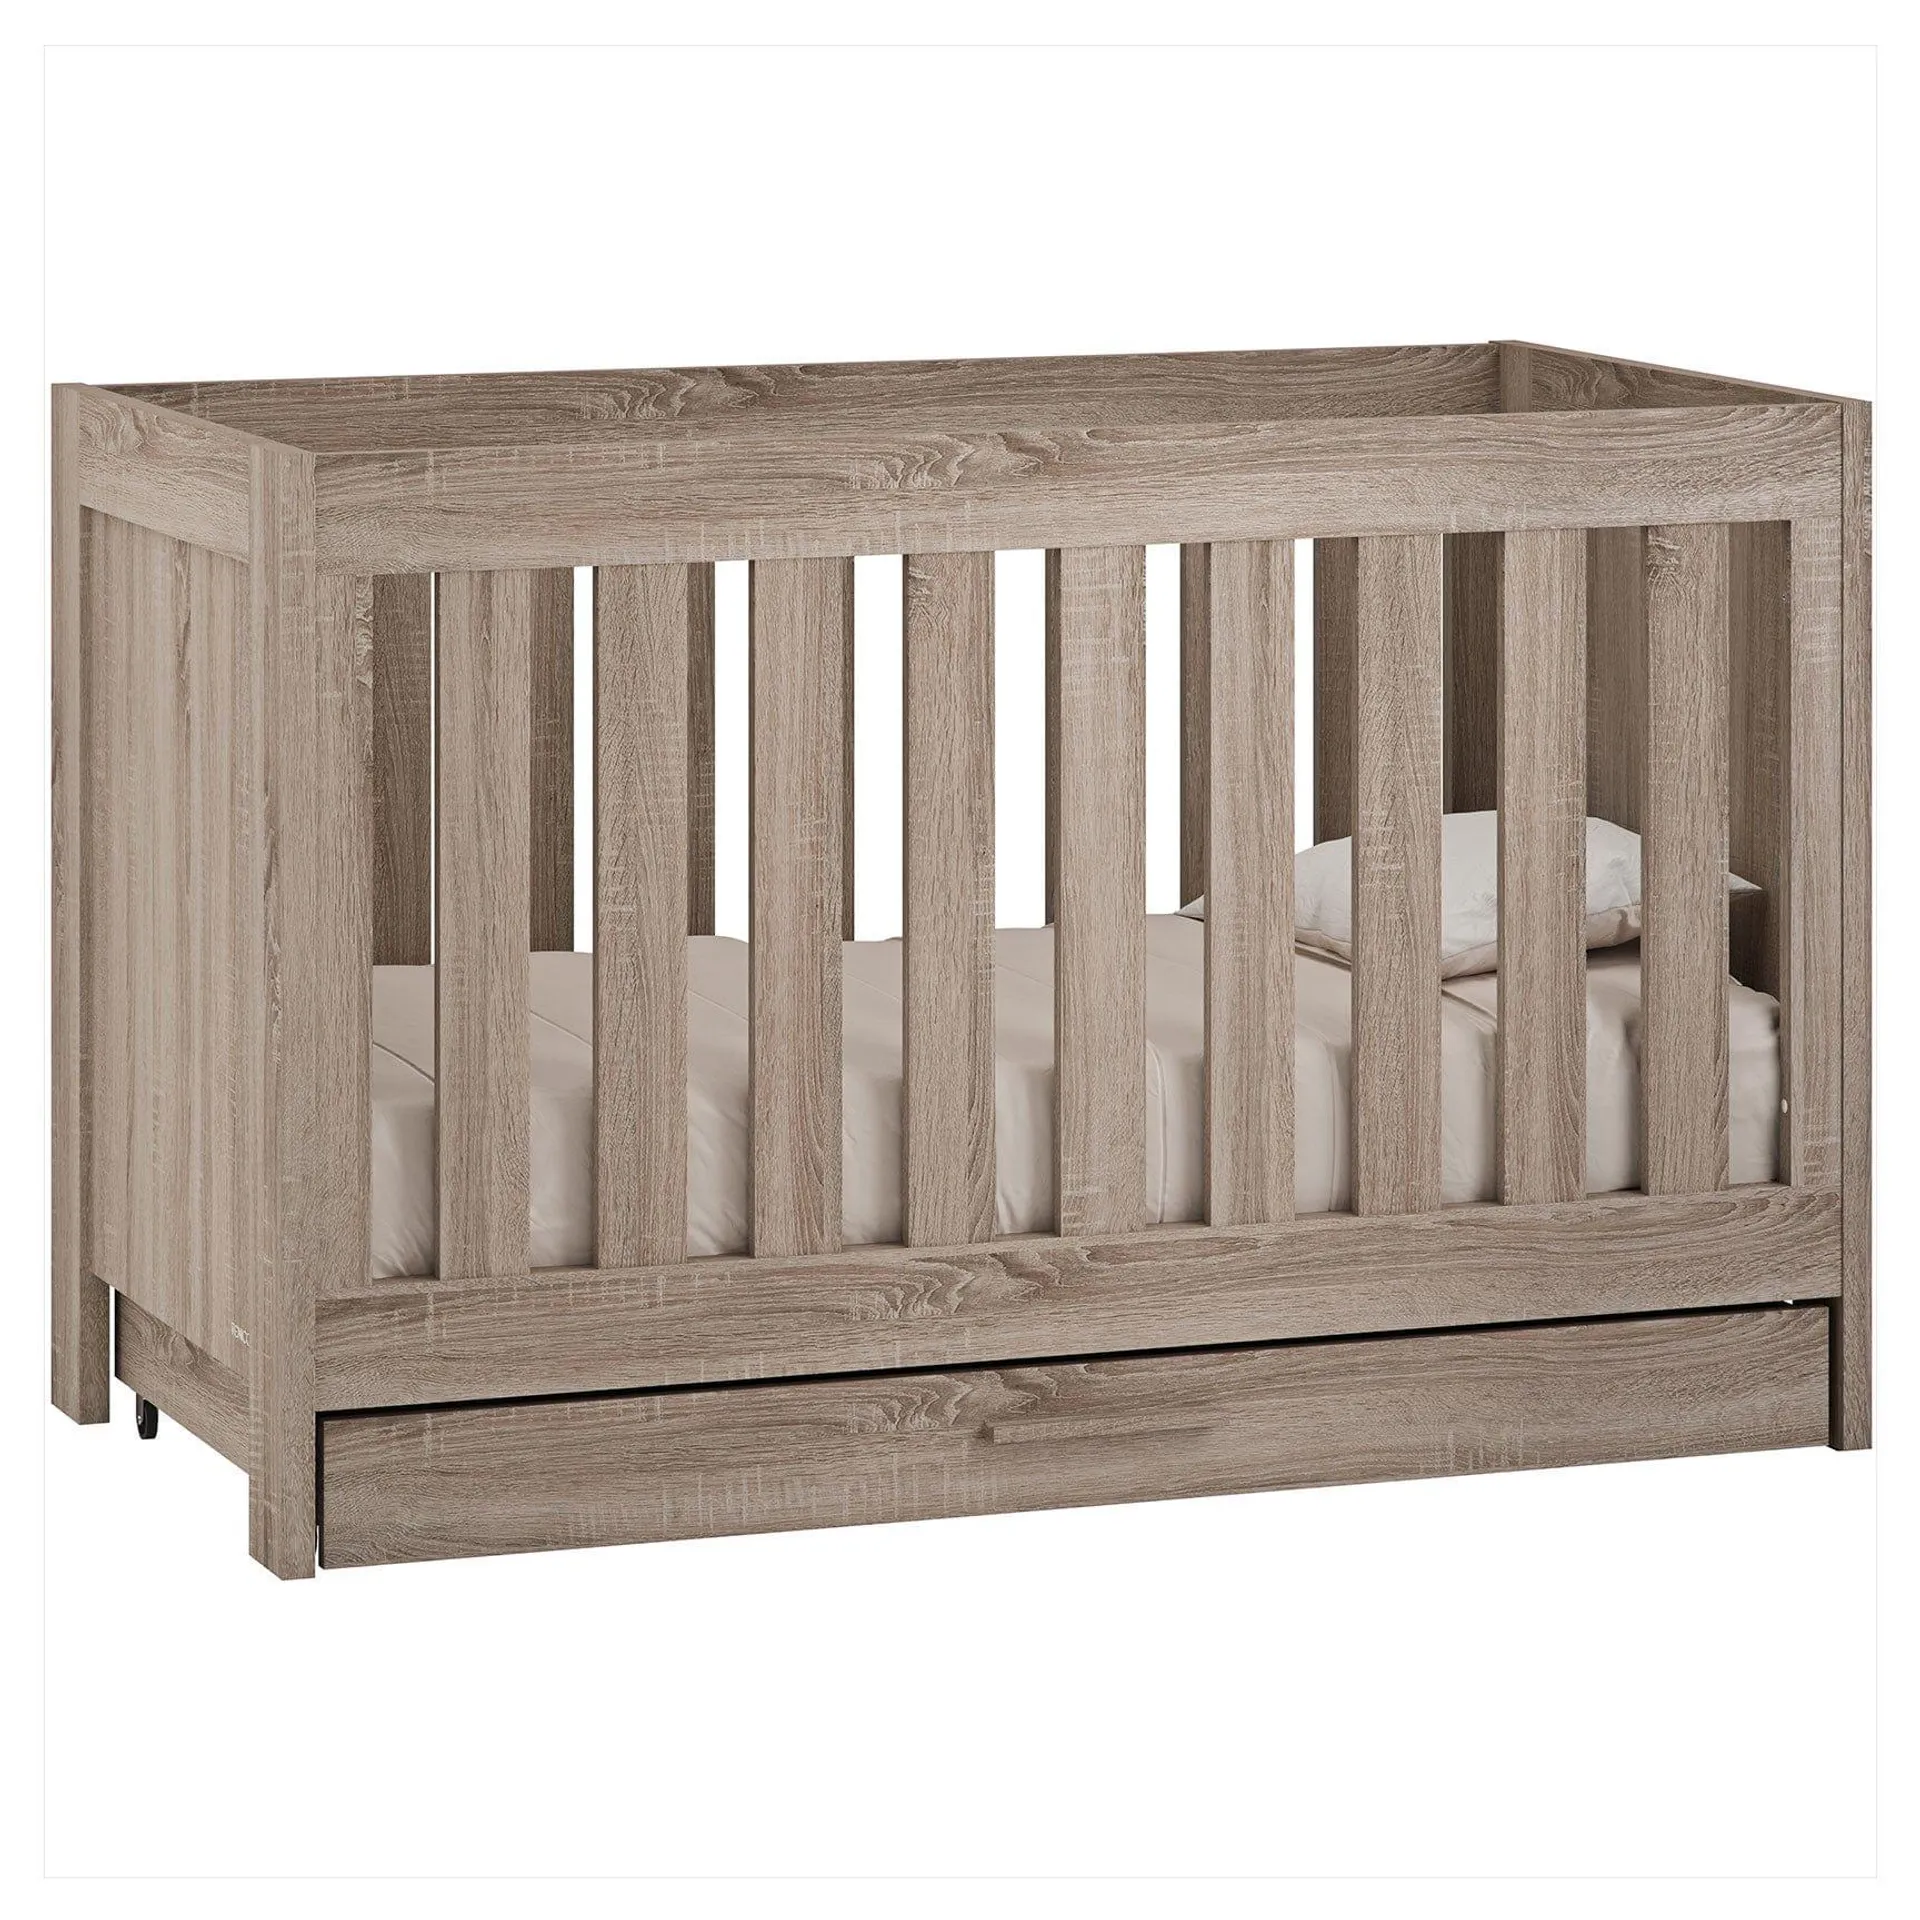 Venicci Forenzo Cot Bed with Drawer in Truffle Oak